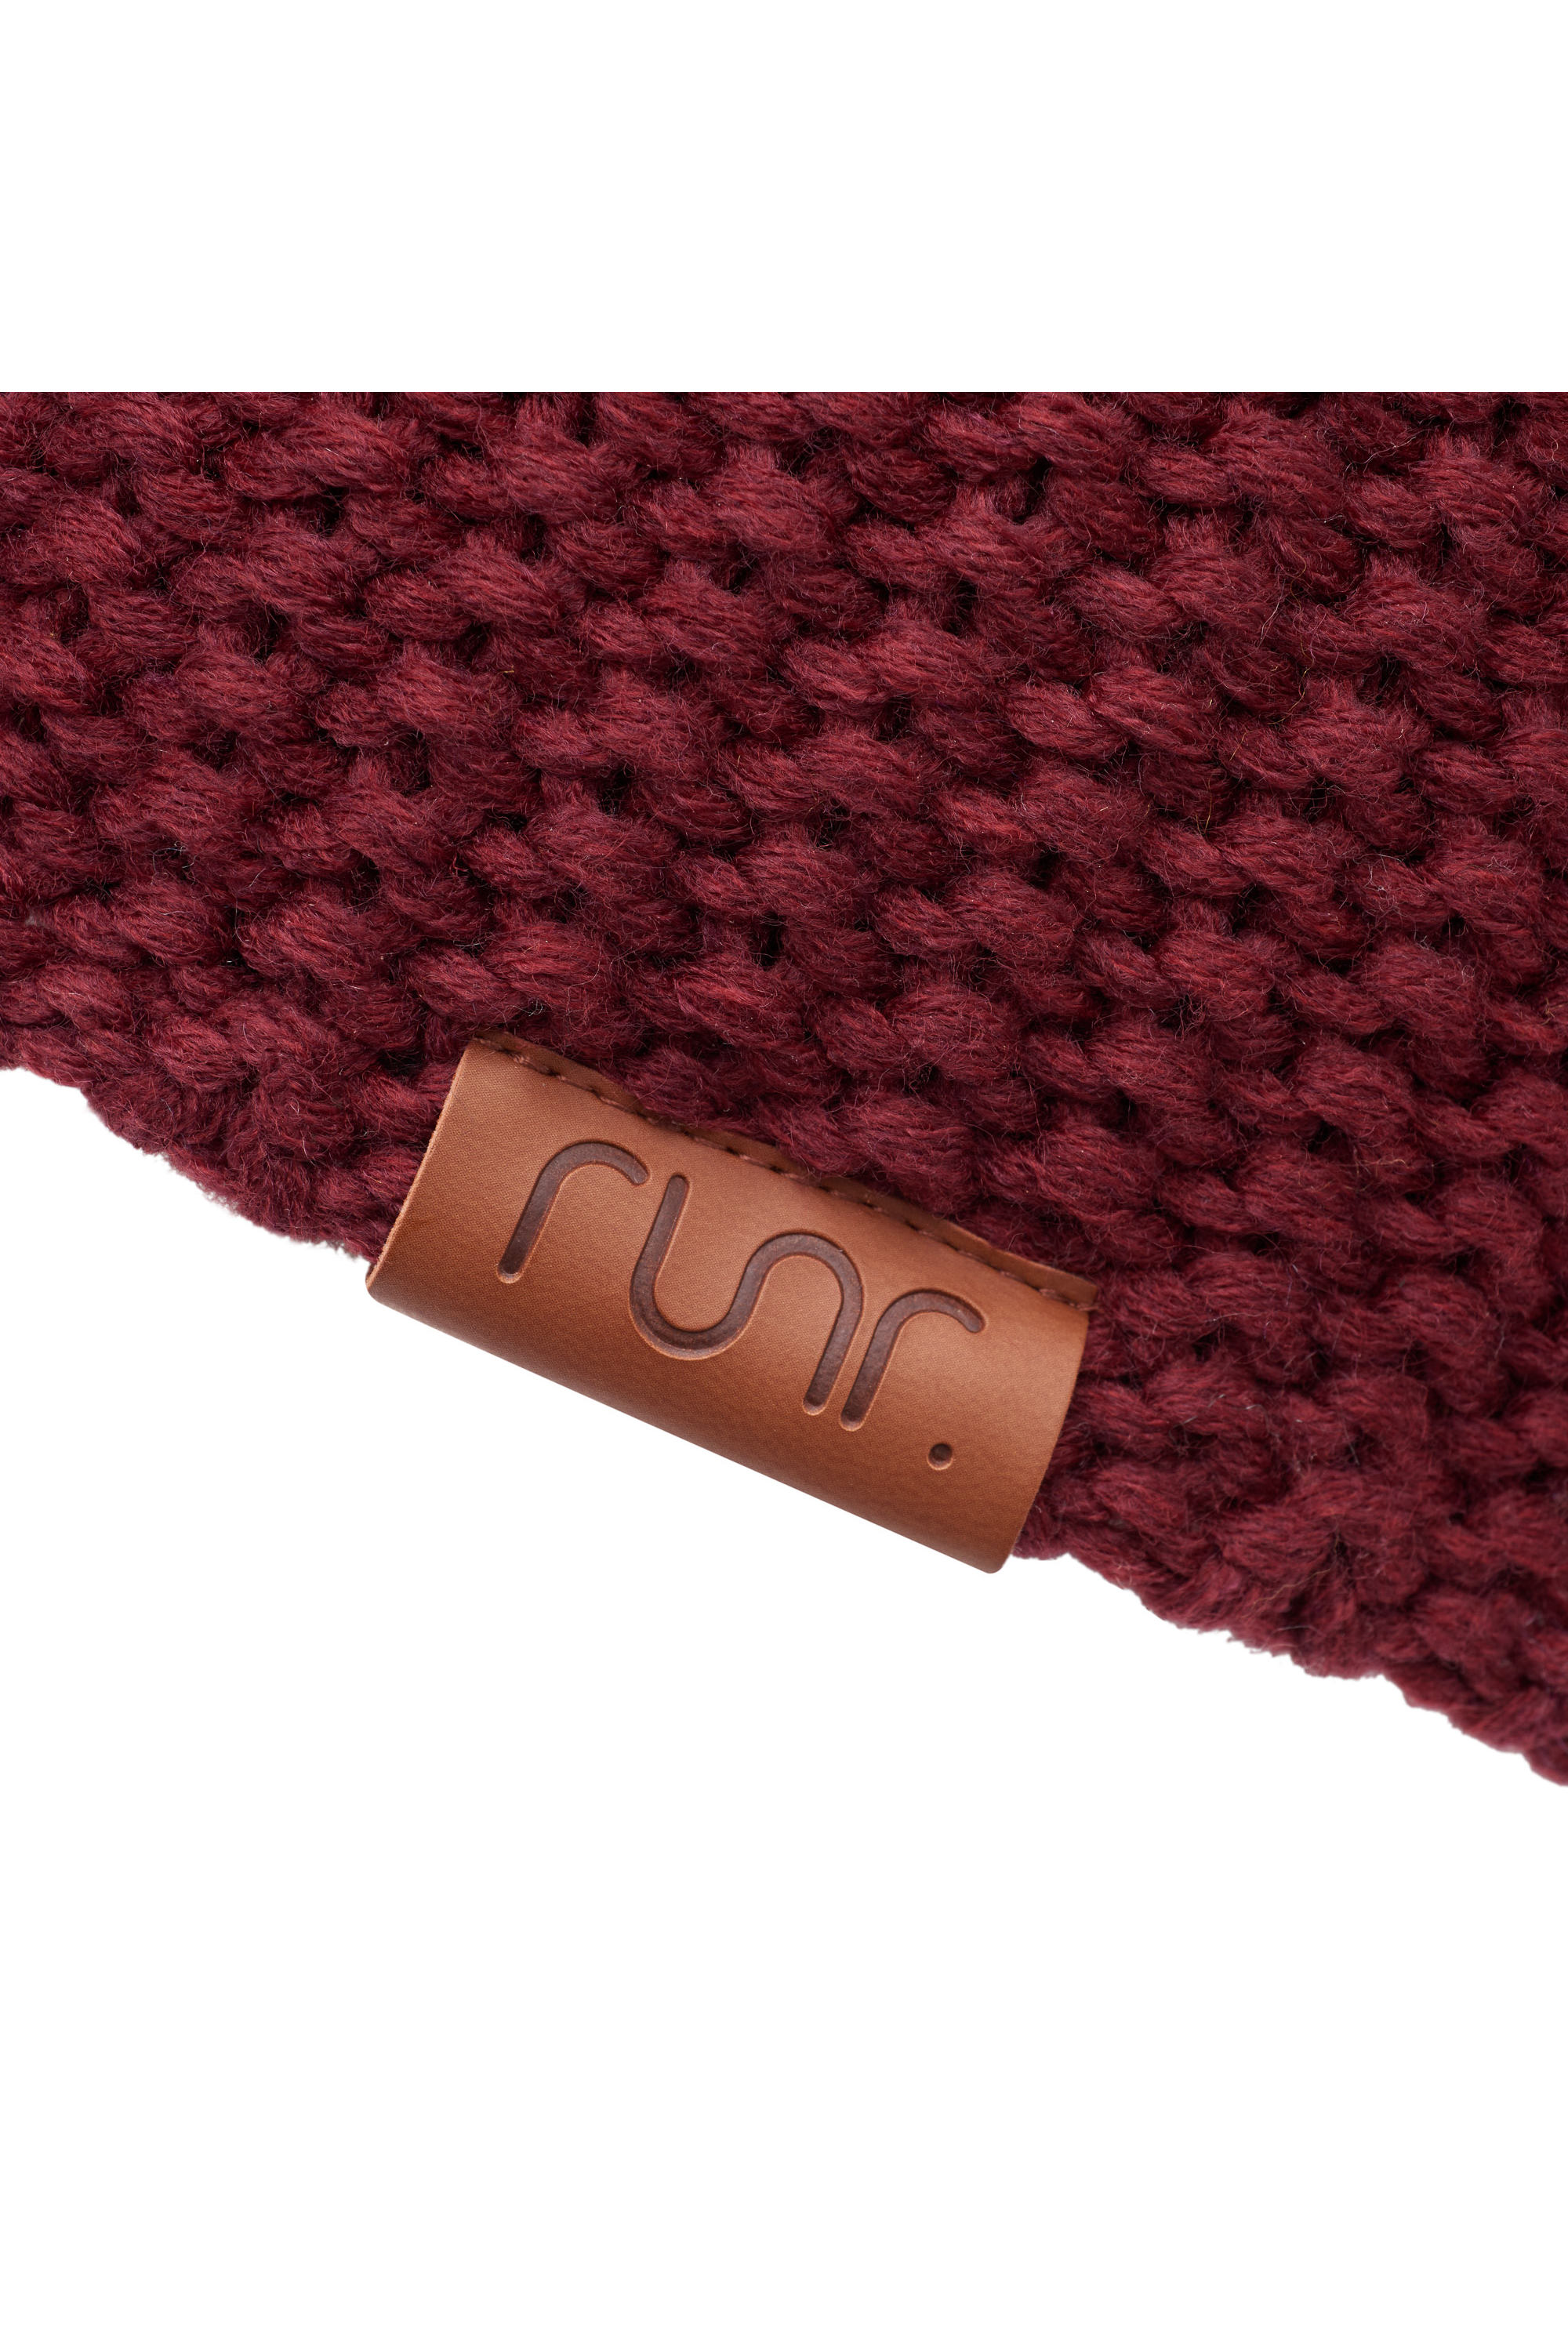 Runr Bromont Headband with faux leather tag